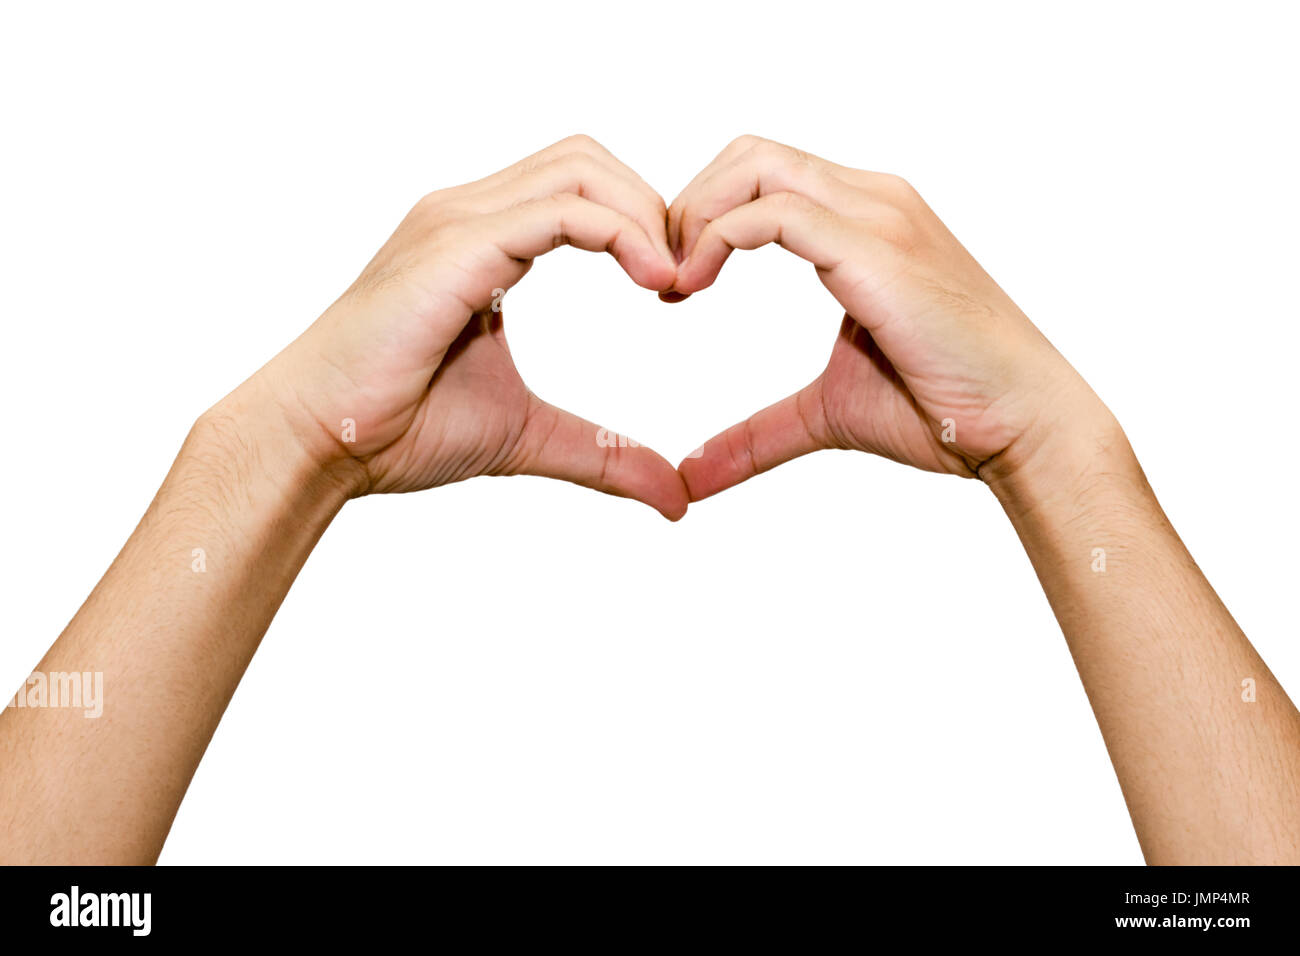 https://c8.alamy.com/comp/JMP4MR/man-hand-making-a-heart-shape-isolated-on-white-background-with-copy-JMP4MR.jpg